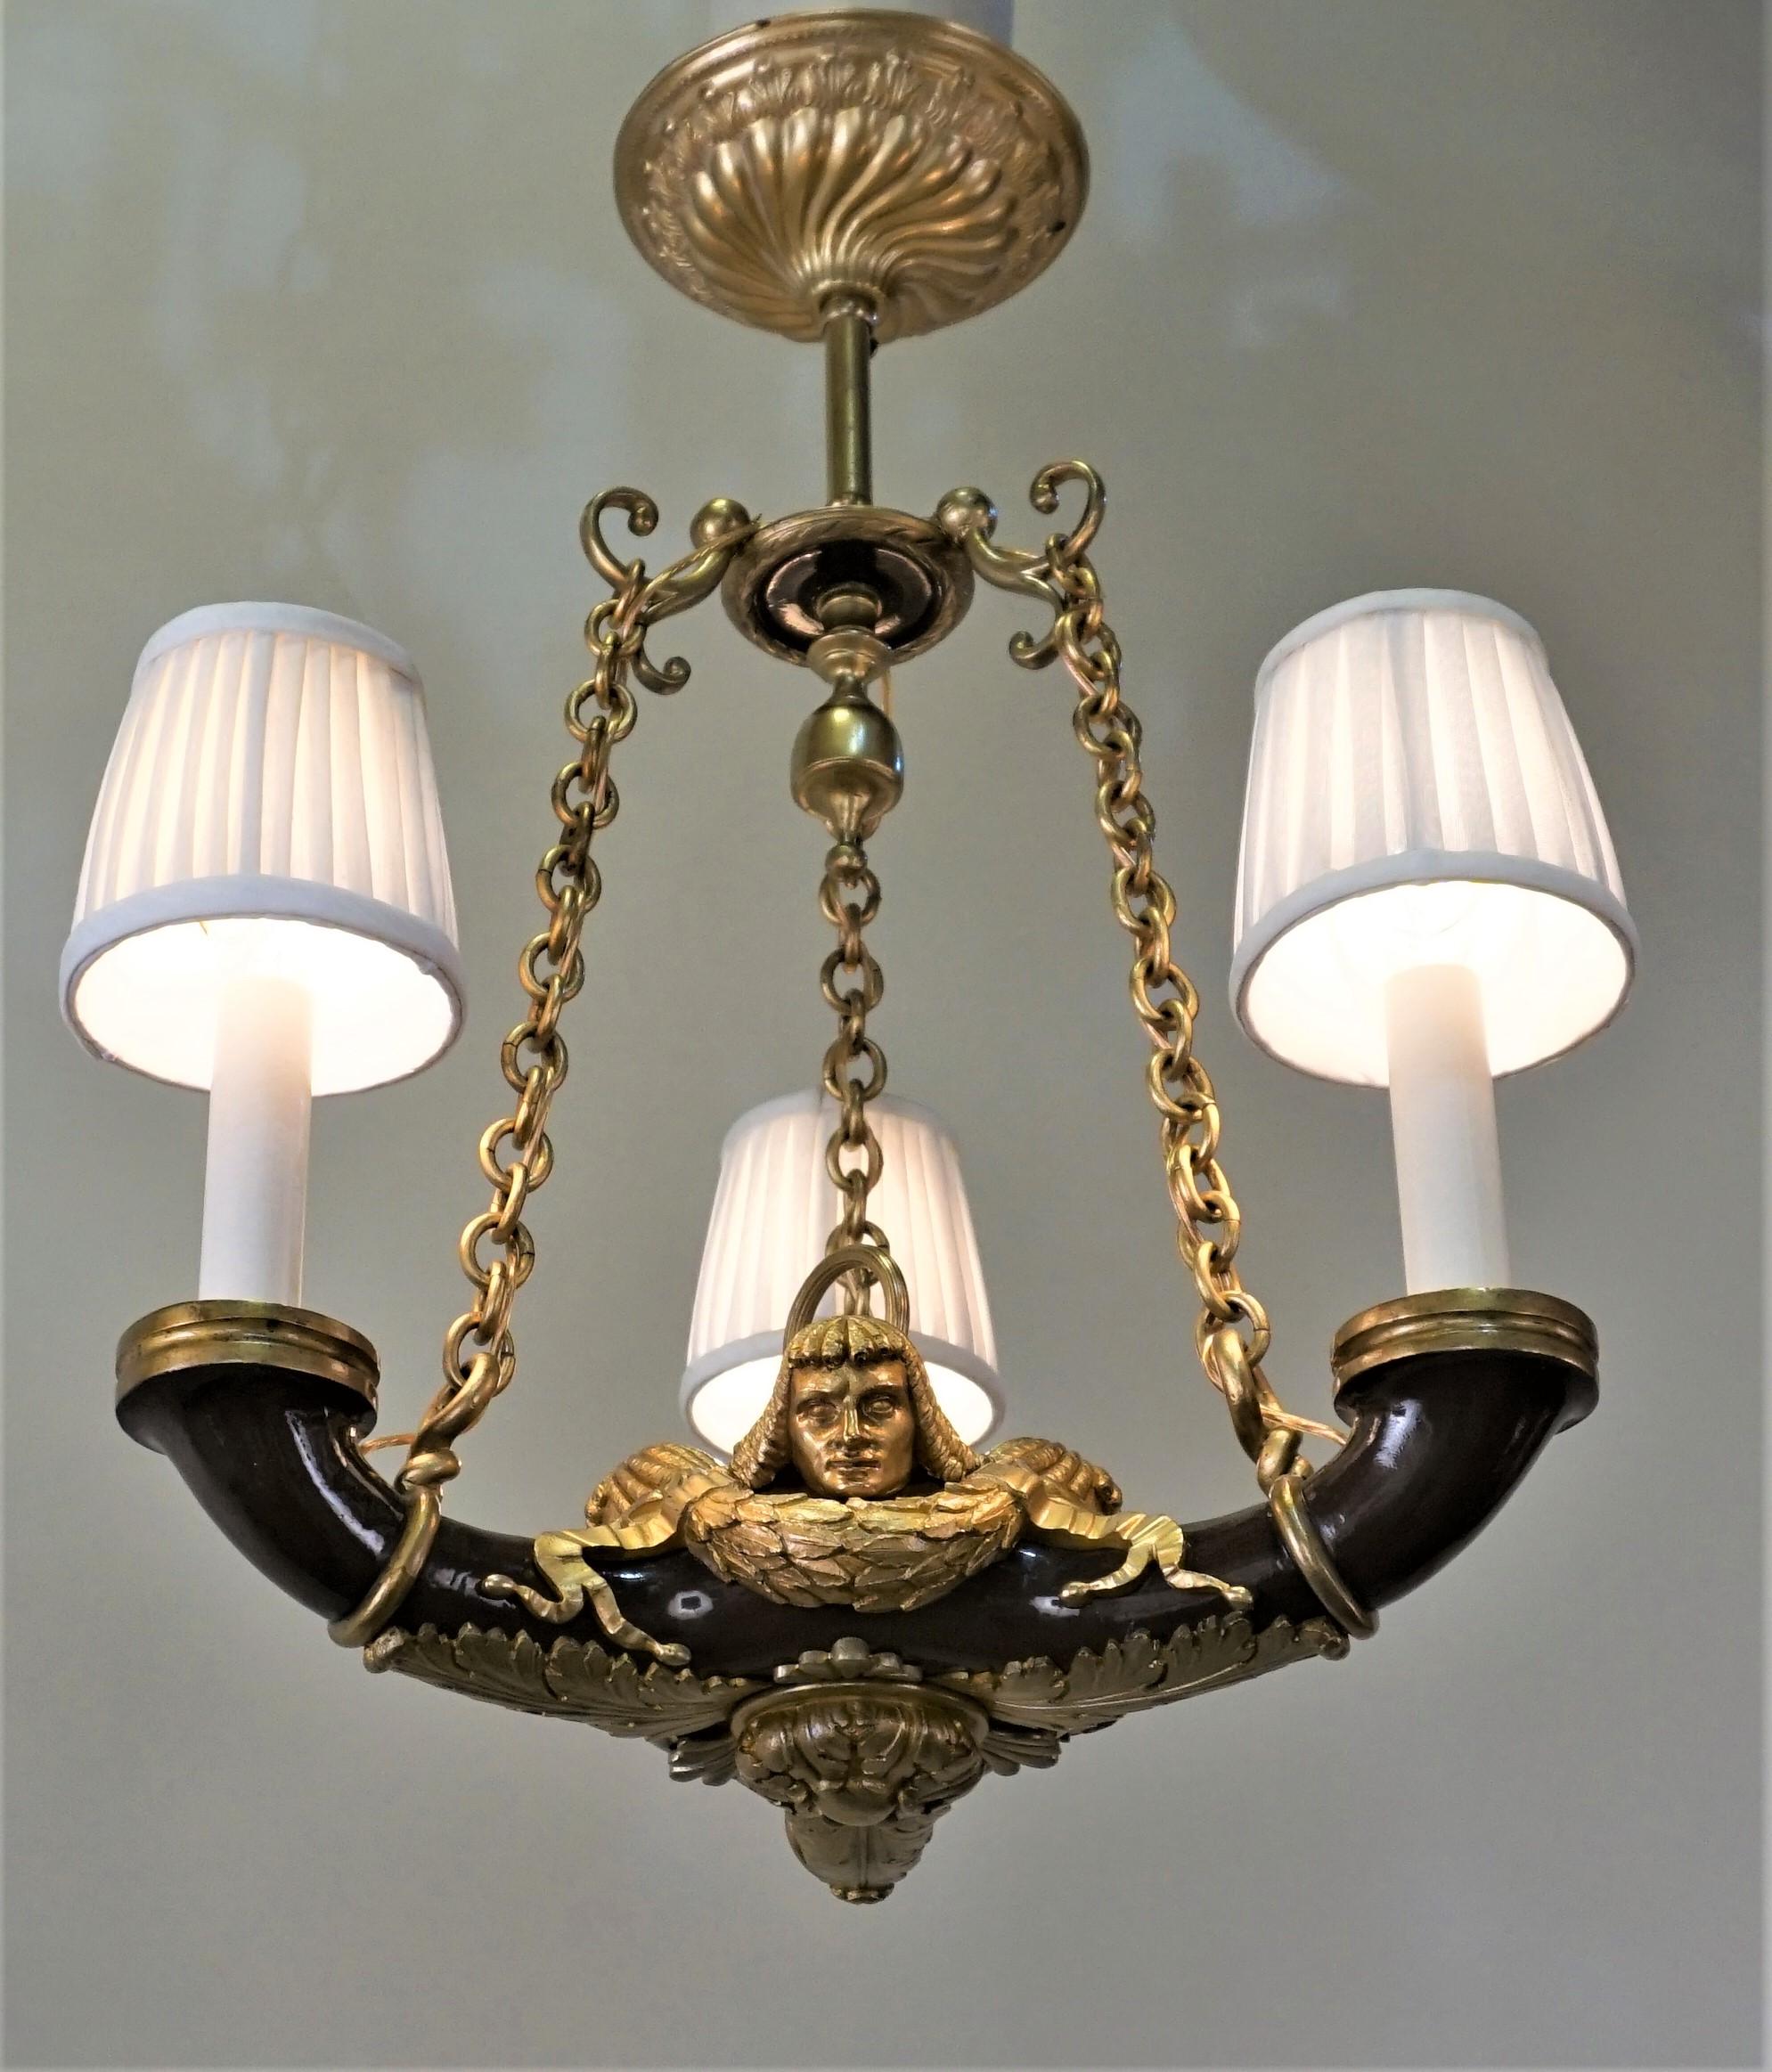 French 1910s three lights doré bronze and lacquer Empire style chandelier.
Fitted pleated silk lampshades
Measurement is without lampshades.